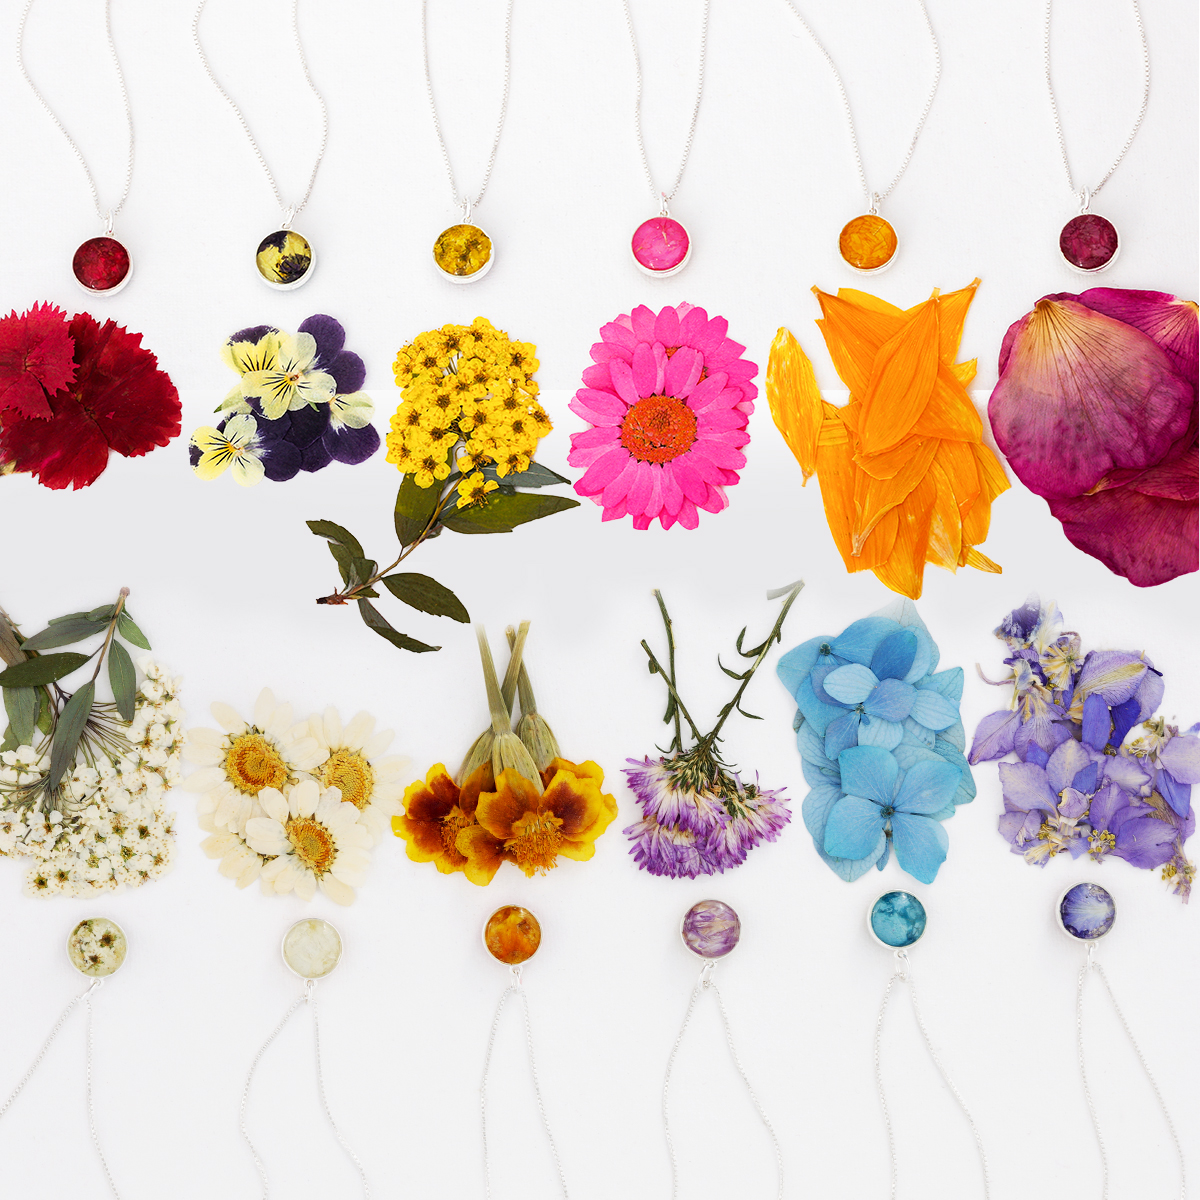 Product shot of 12 different birth month flower petals and jewelry featuring them.